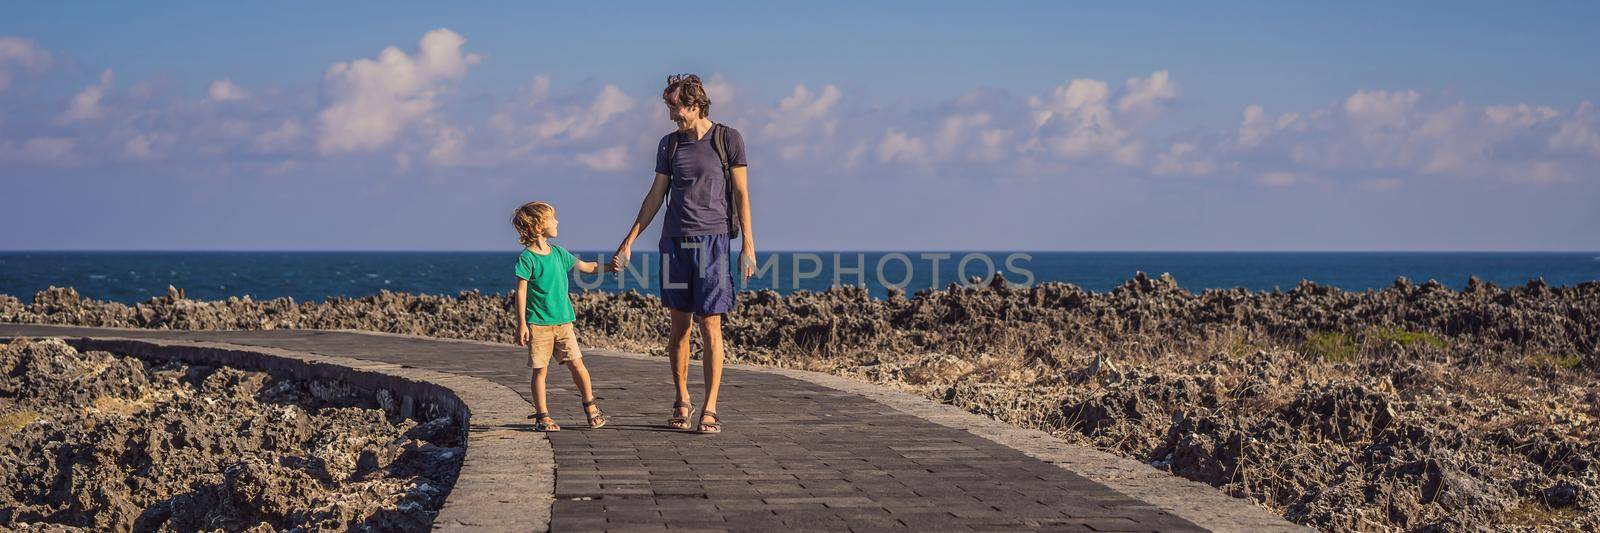 Father and son travelers on amazing Nusadua, Waterbloom Fountain, Bali Island Indonesia. Traveling with kids concept. BANNER, LONG FORMAT